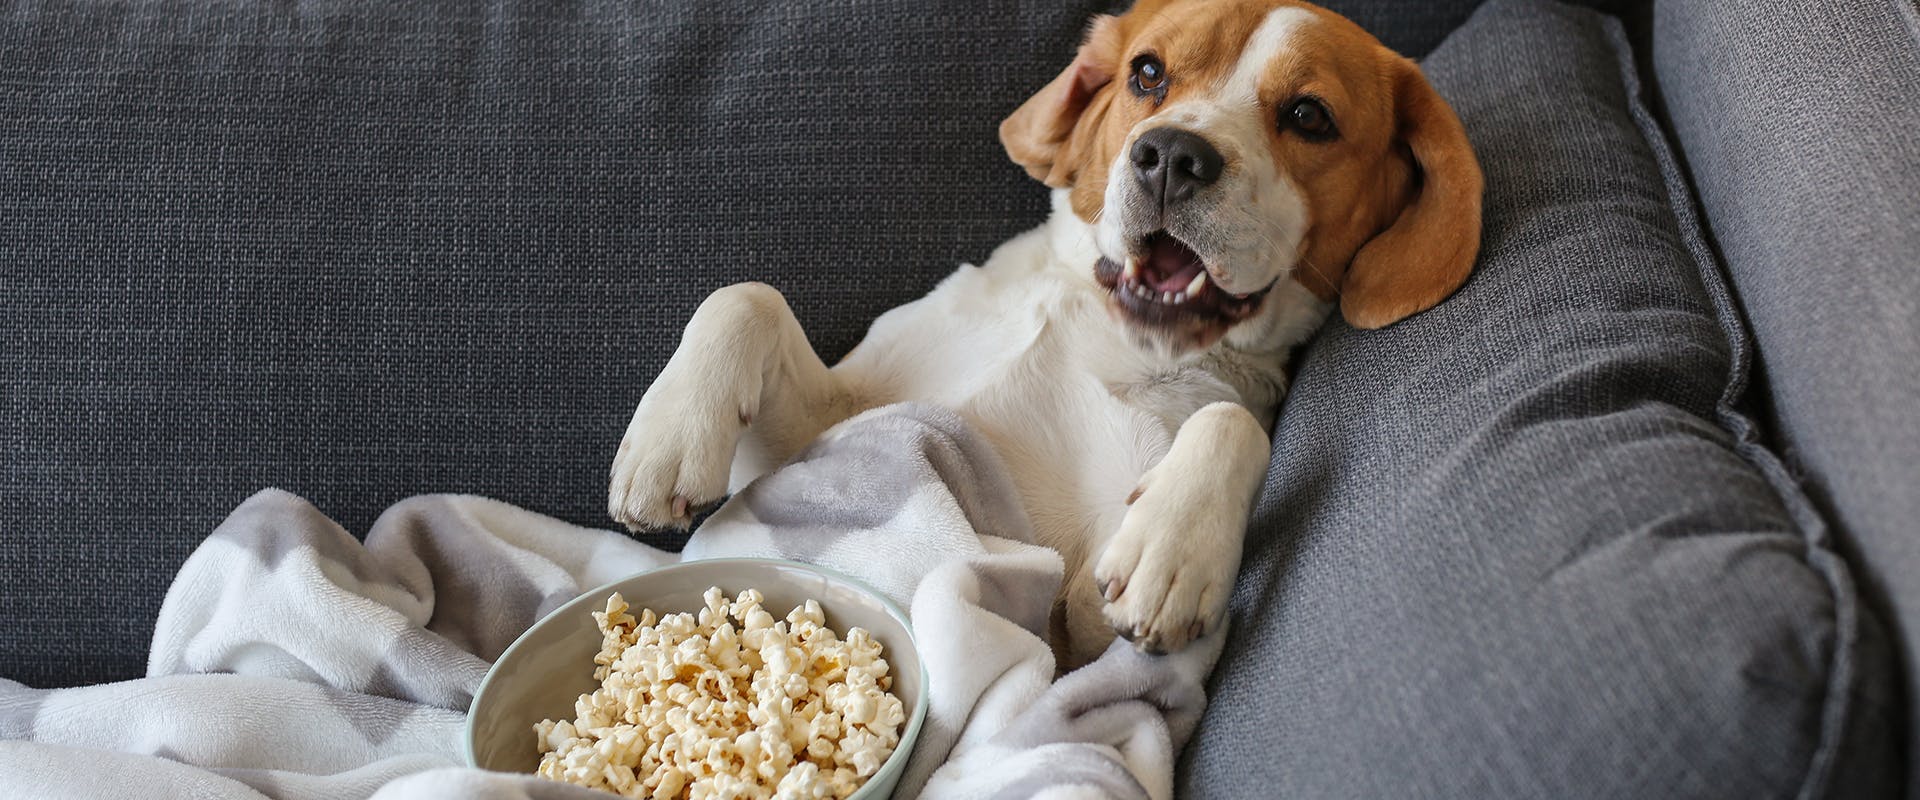 A dog leaning back on a sofa next to a bowl of popcorn